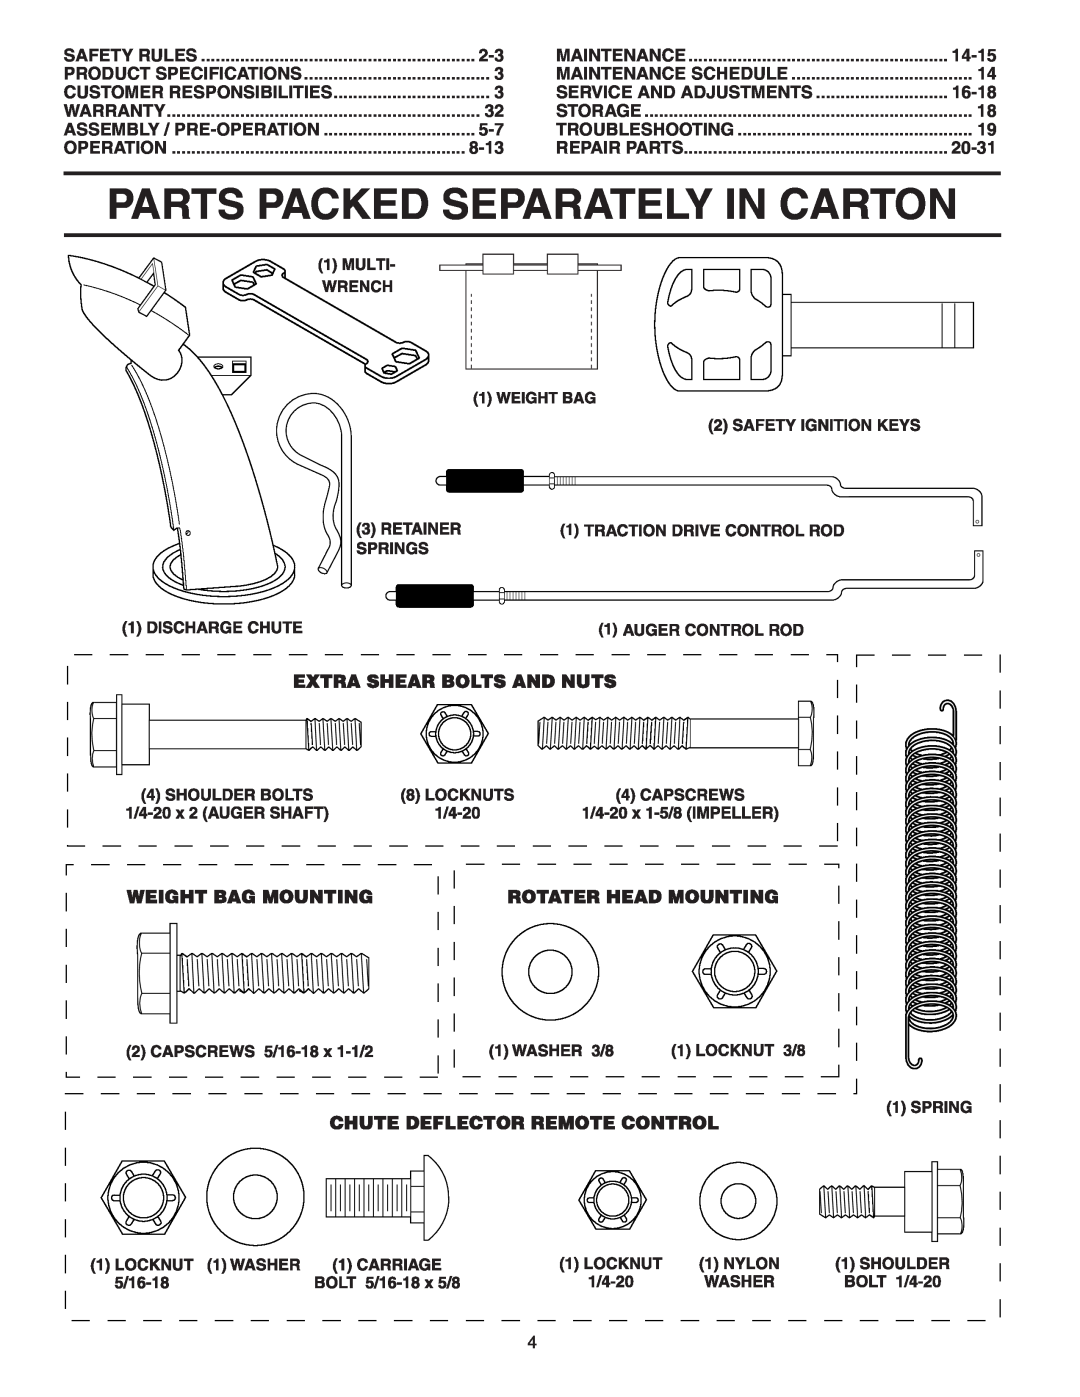 Poulan P8527ESA Parts Packed Separately In Carton, 8-13, 14-15, Service And Adjustments, 16-18, 20-31, Safety Rules 